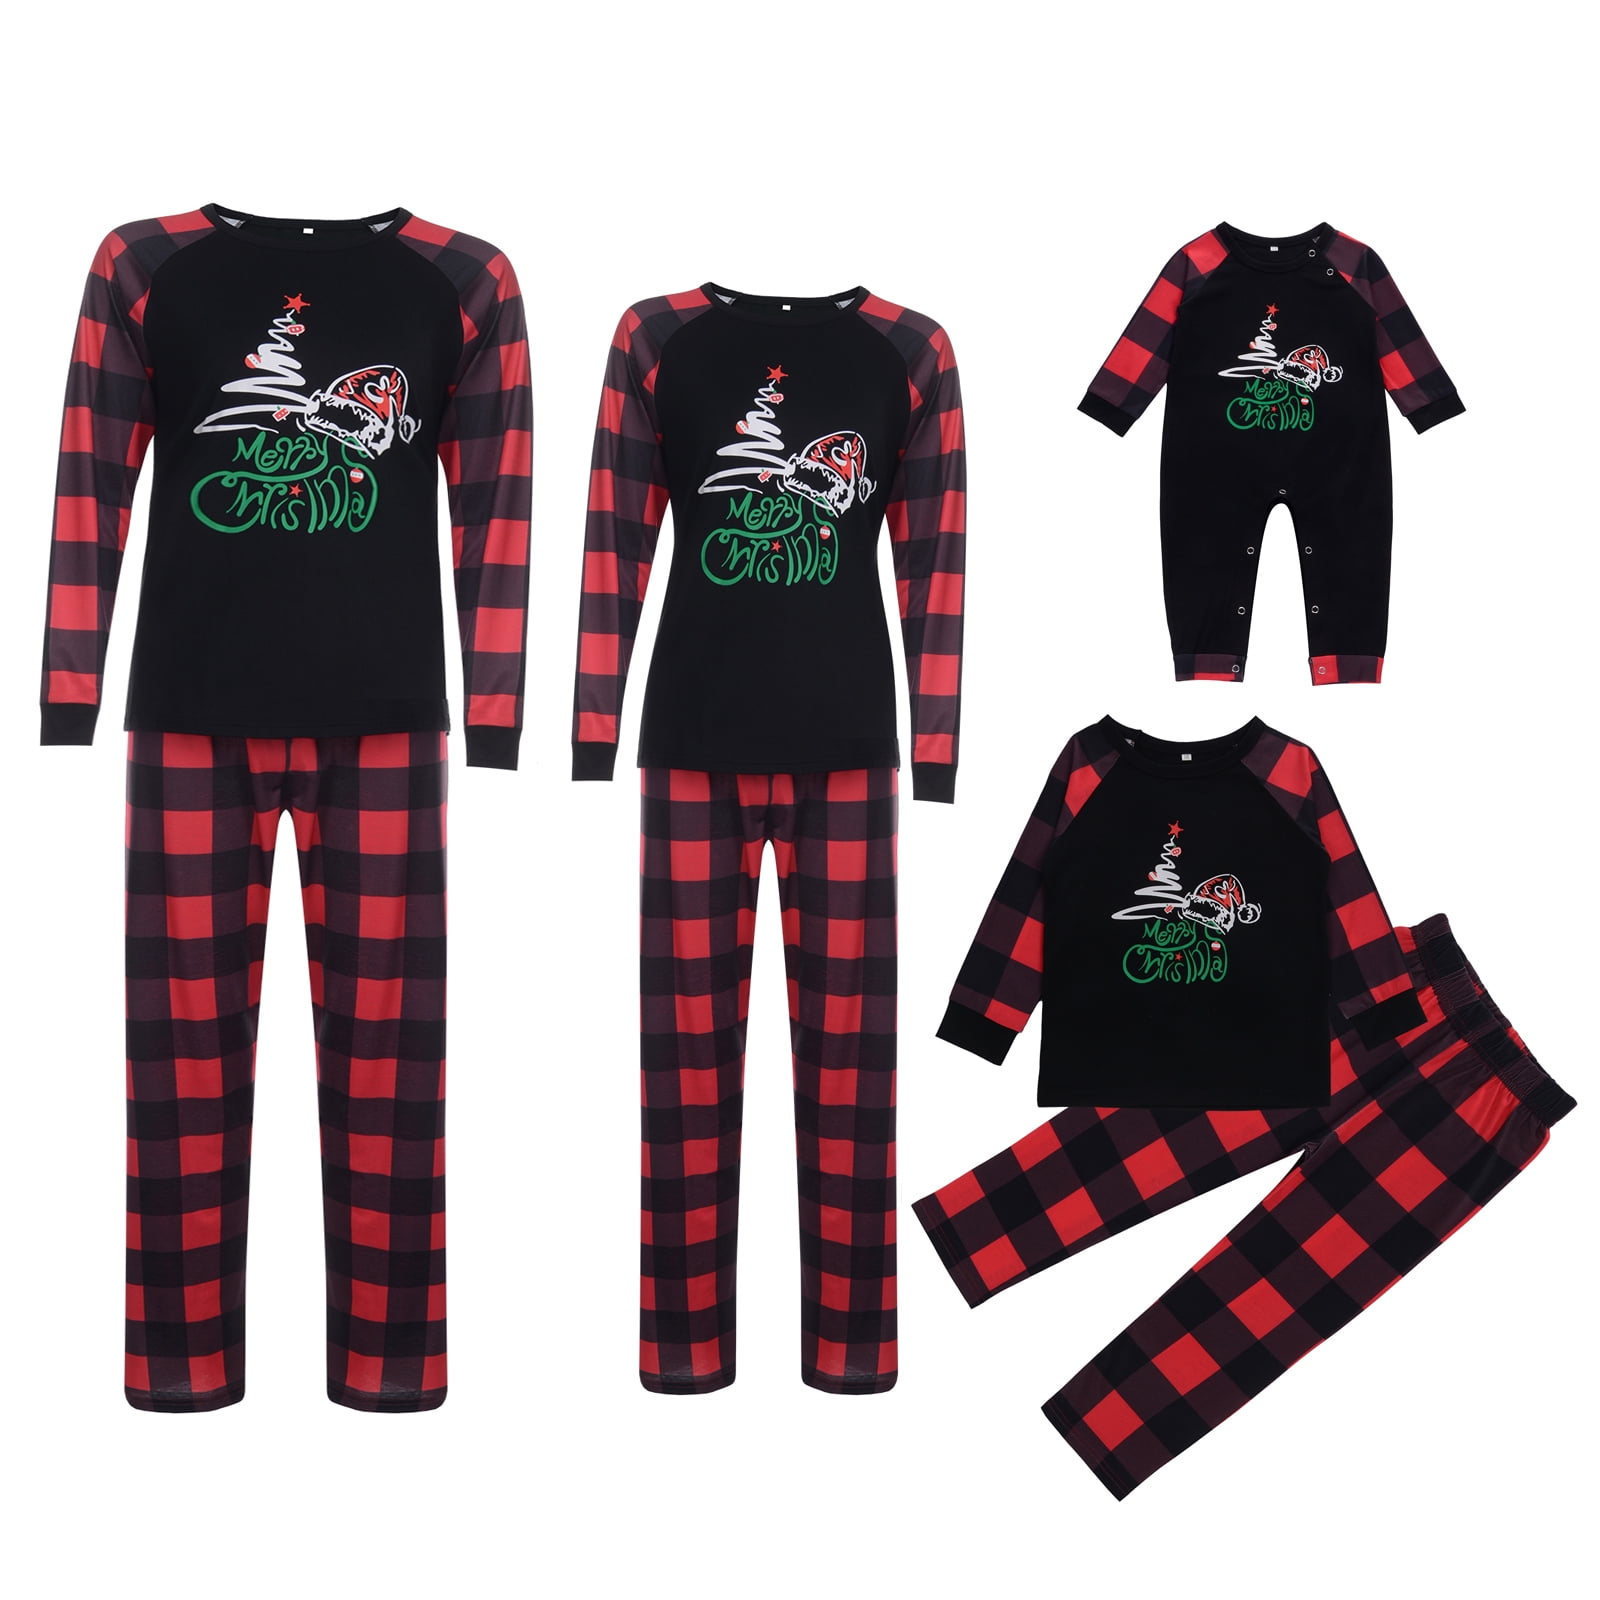 Personalised Embroidered Children's Tartan All in one romper Christmas Eve Box 2-3y 0-6m Traditional nightwear Sizes Clothing Unisex Kids Clothing Pyjamas & Robes Pyjamas Christmas Pyjamas 